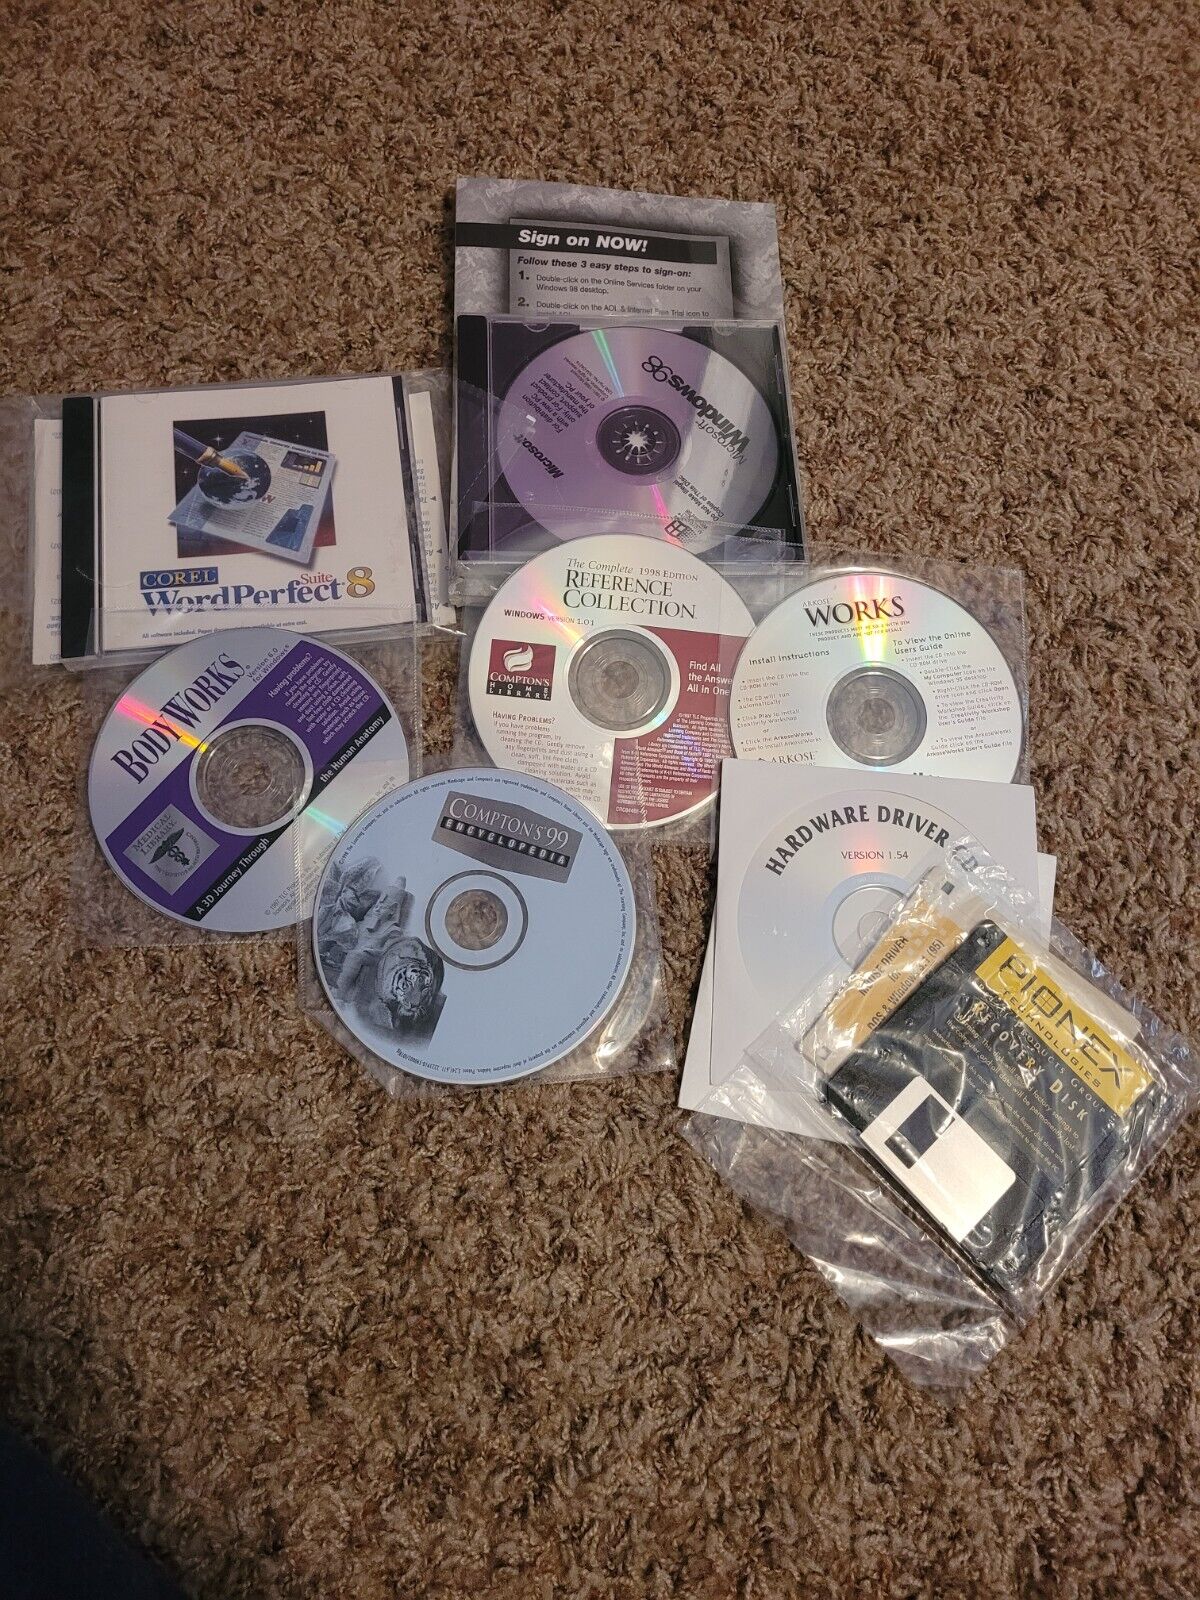 windows 98, corel word perfect 8, body works, compton encyclopedia 99, and more